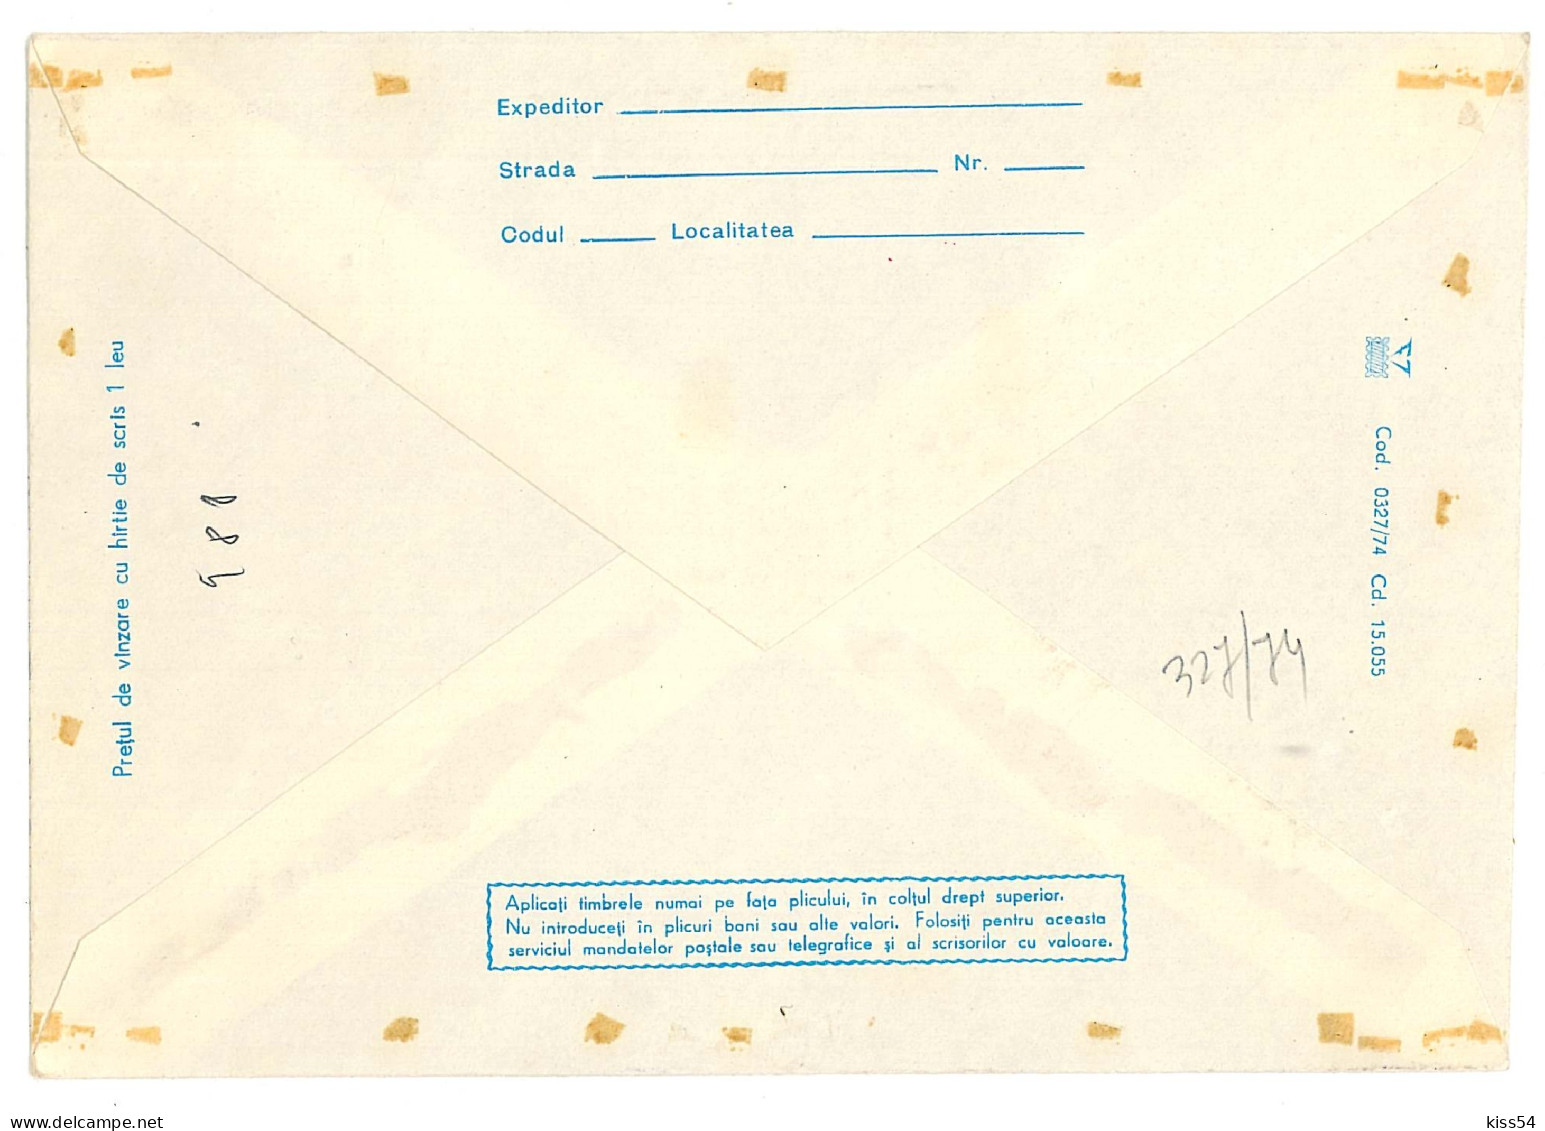 IP 74 - 327-a MILL, Romania - Stationery - Unused - 1974 - Water